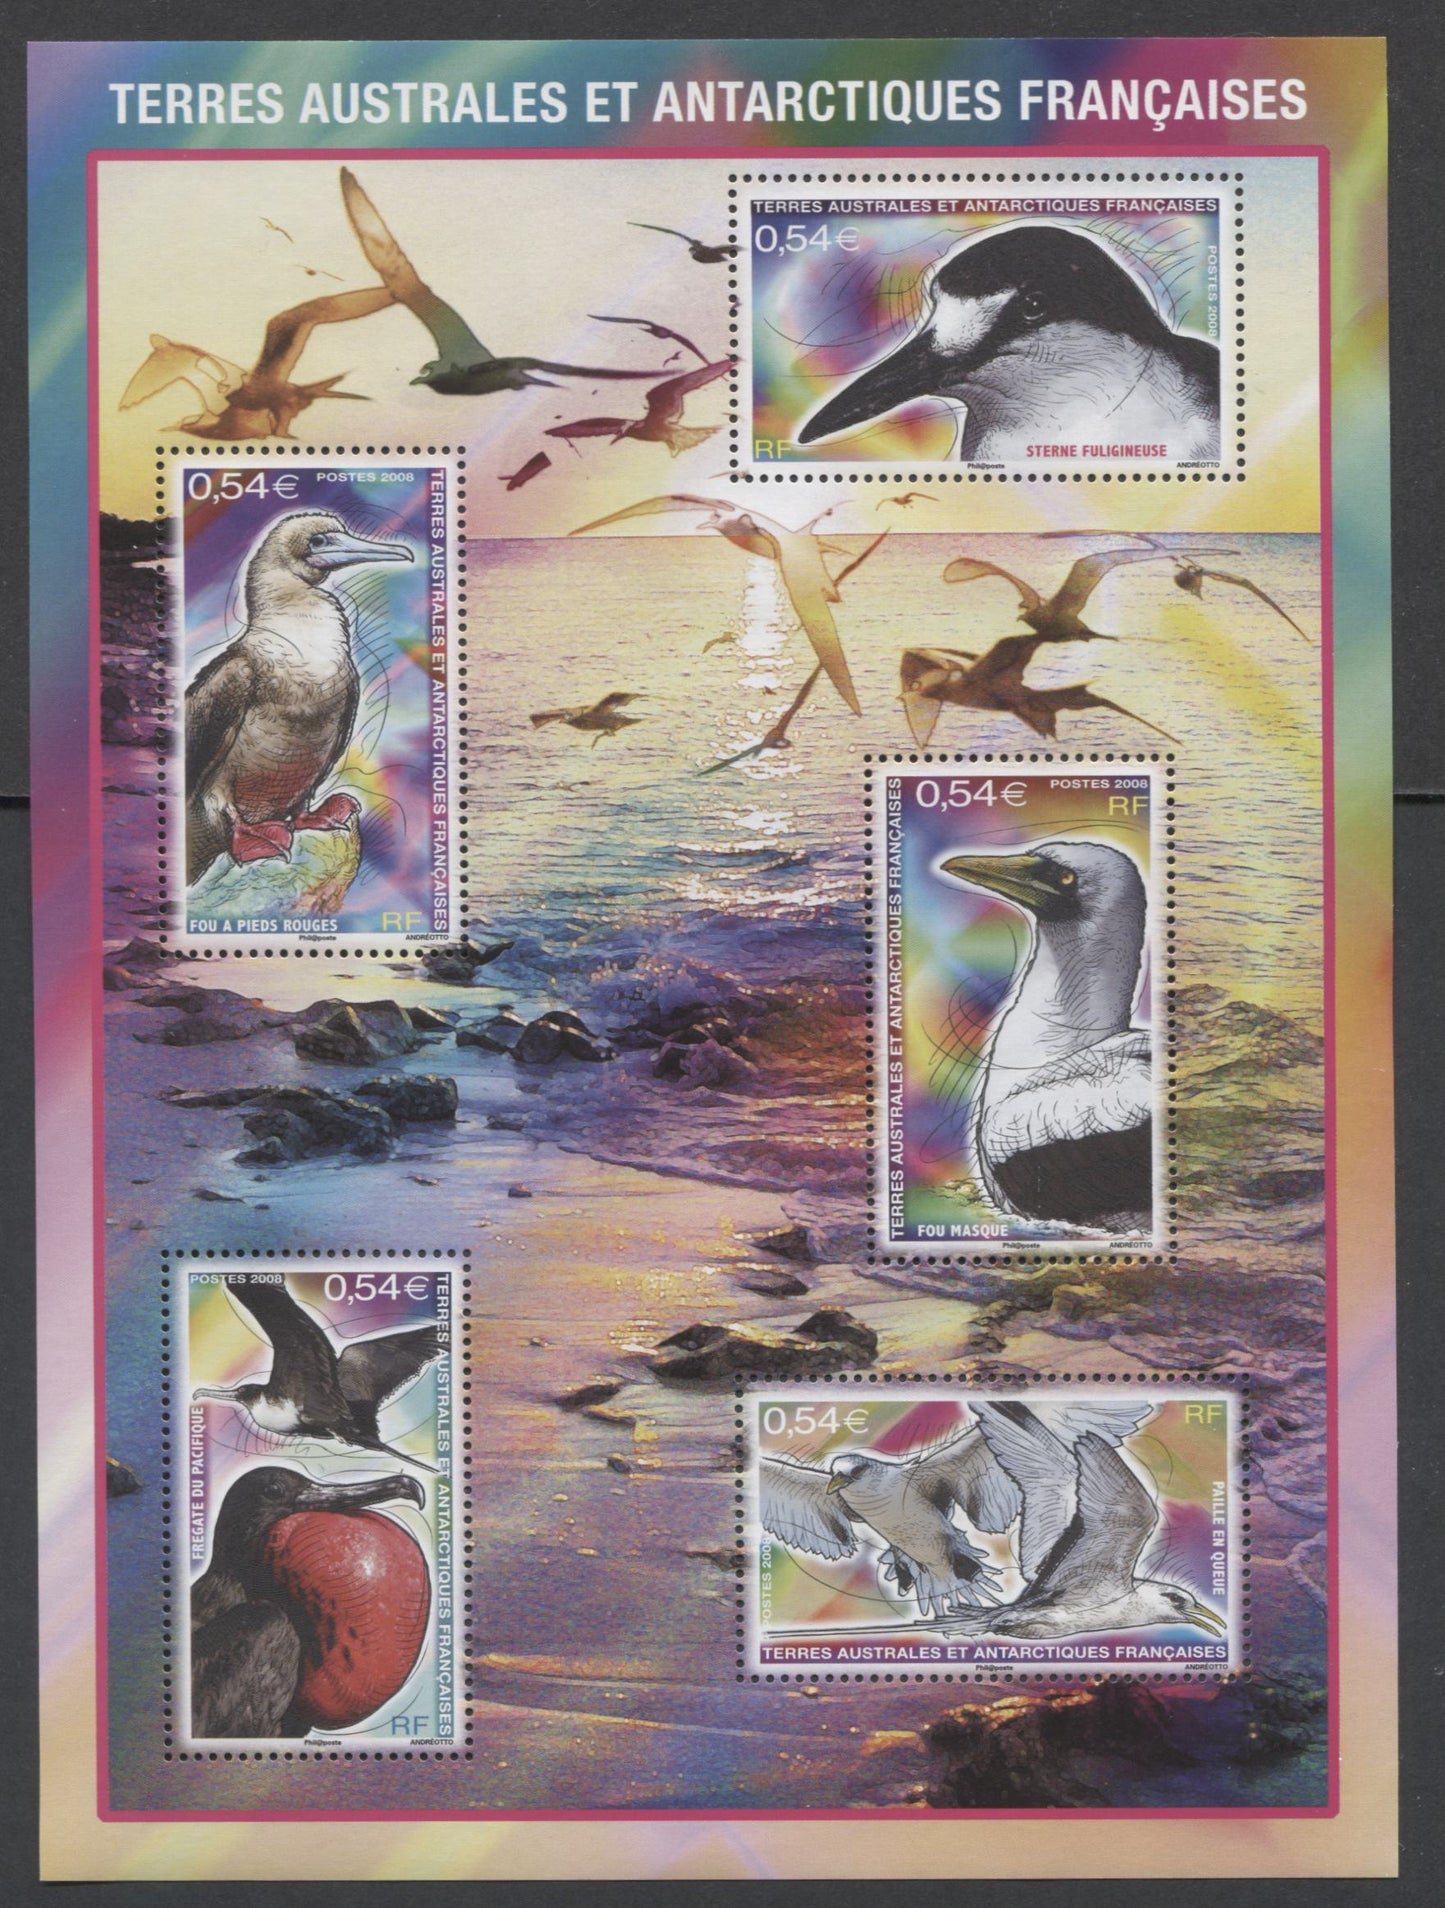 Lot 180 French Southern & Antarctic Territory SC#408/479 2008-2013 Birds - Nature Reserve Issues, 4 VFNH Souvenir Sheets, Click on Listing to See ALL Pictures, 2017 Scott Cat. $31